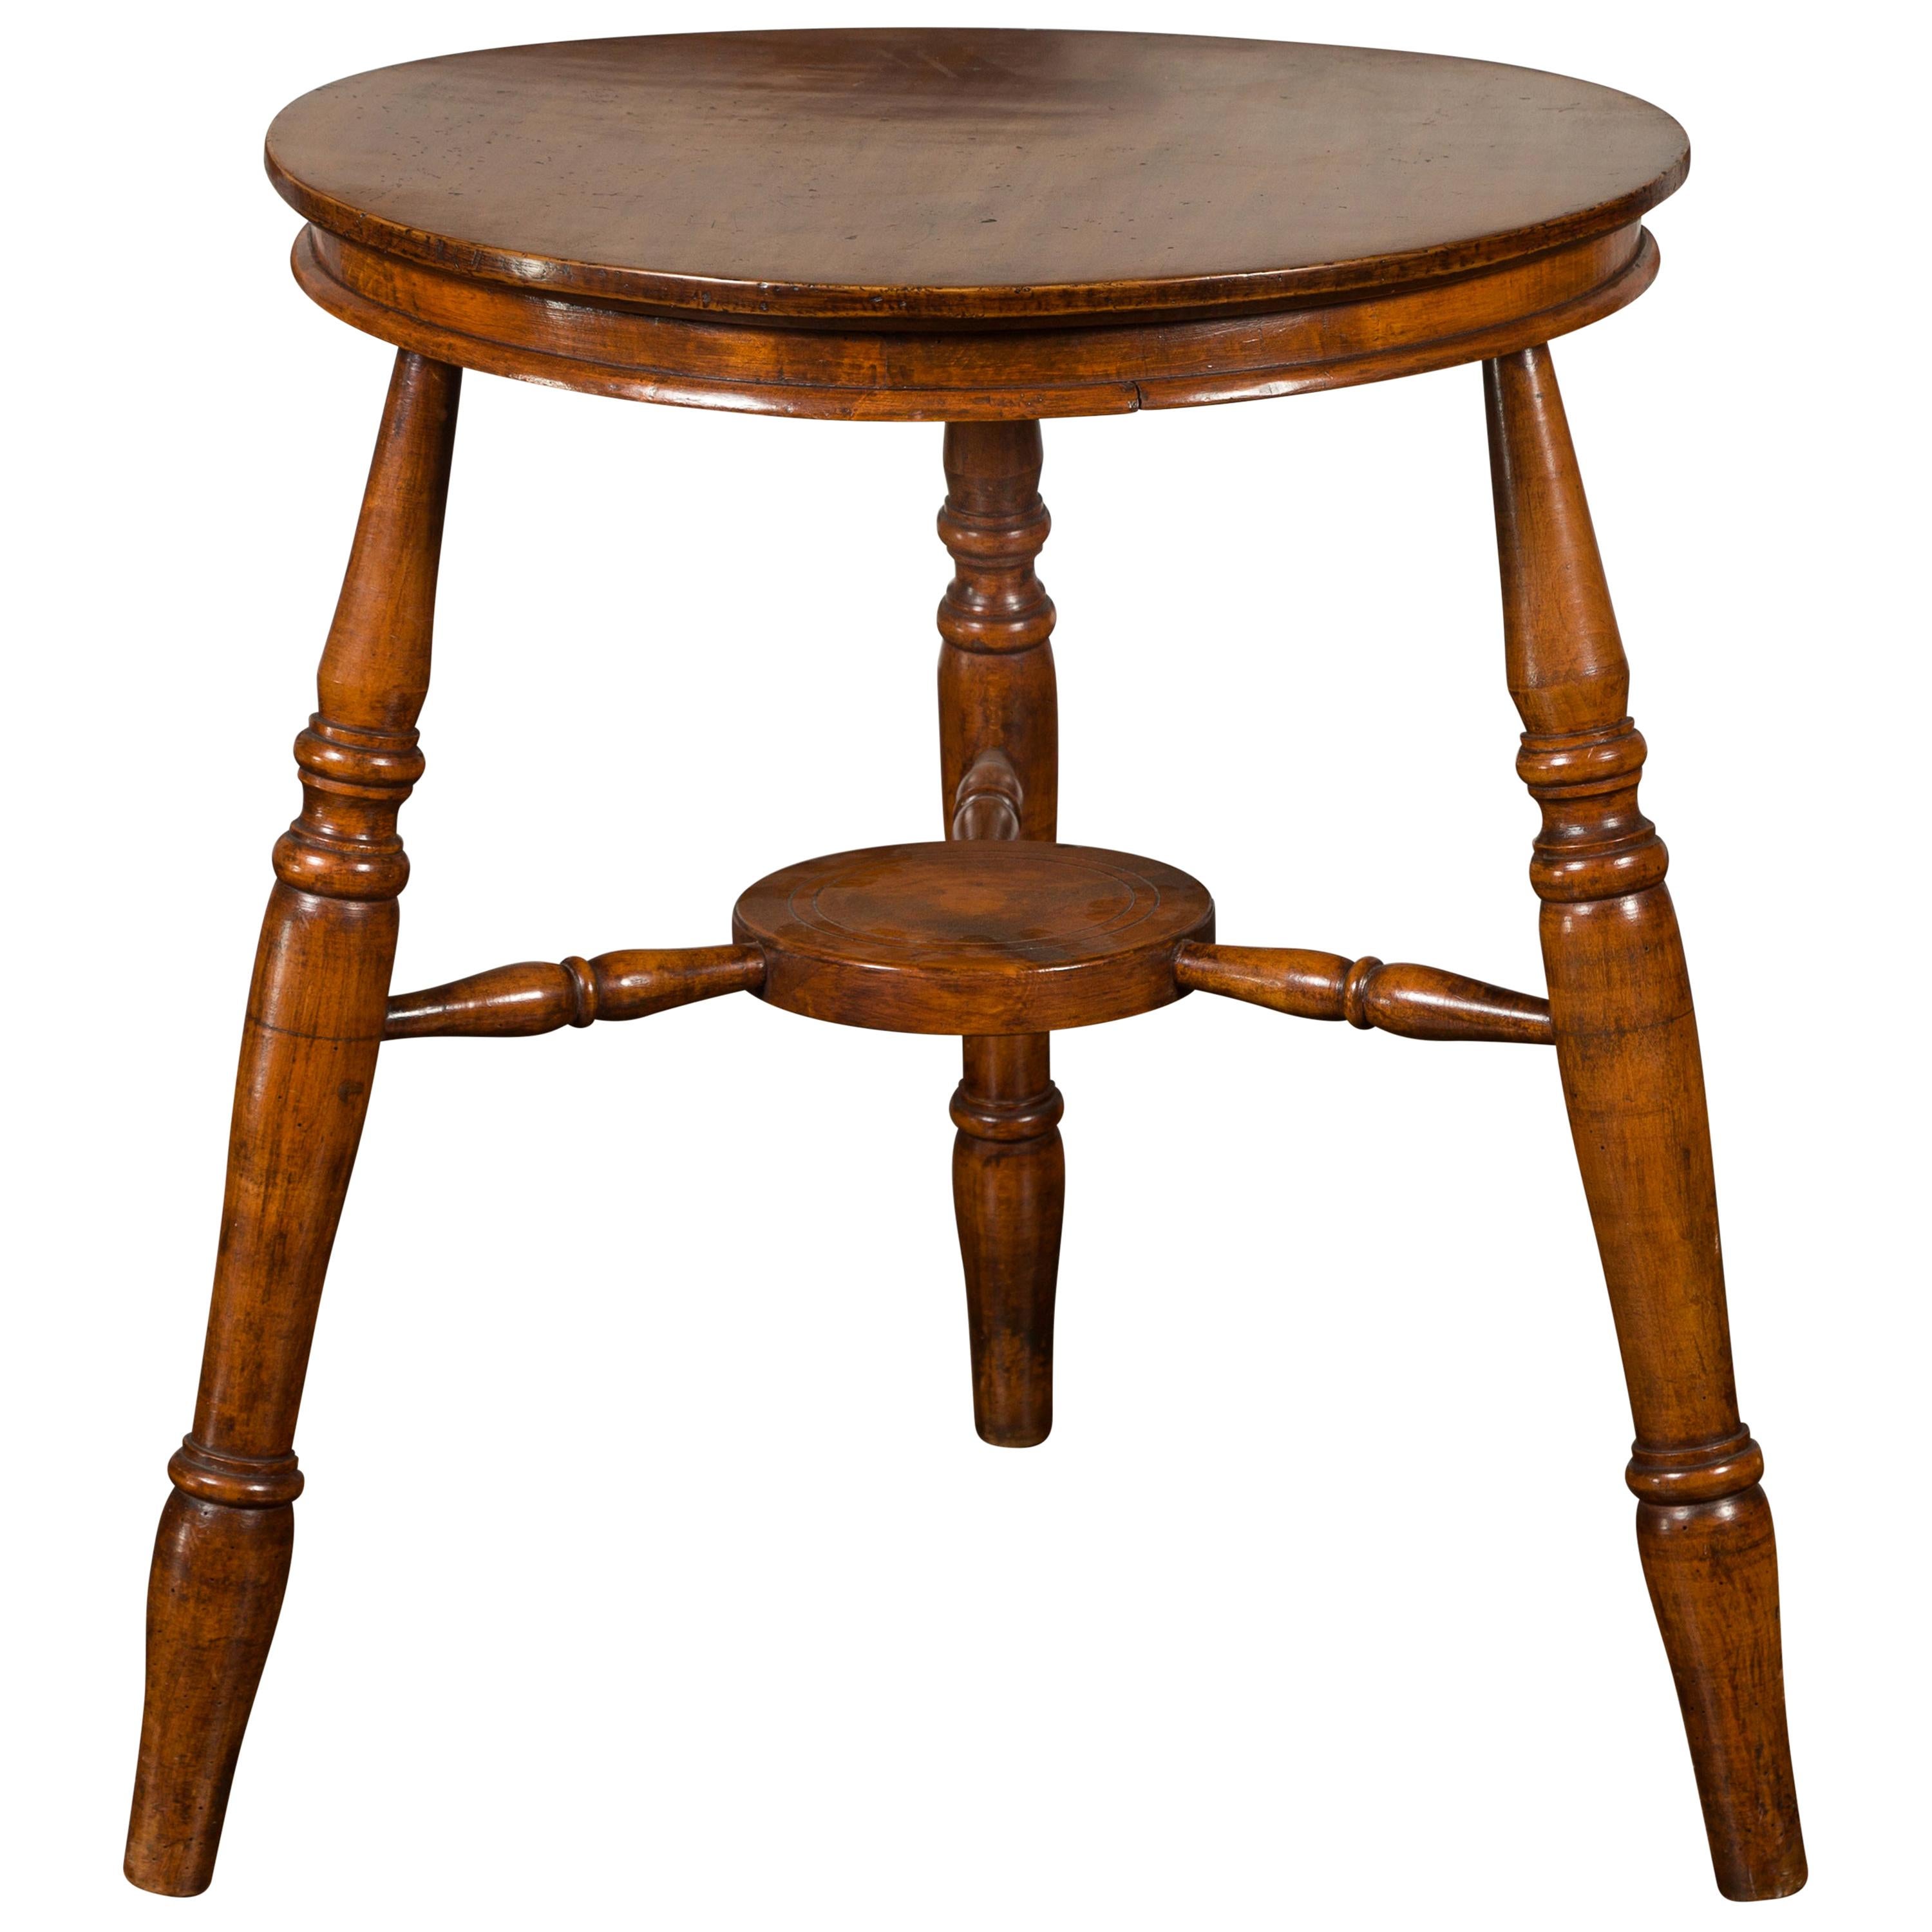 English 1860s Cricket Table With Turned, Small Round Vintage Table